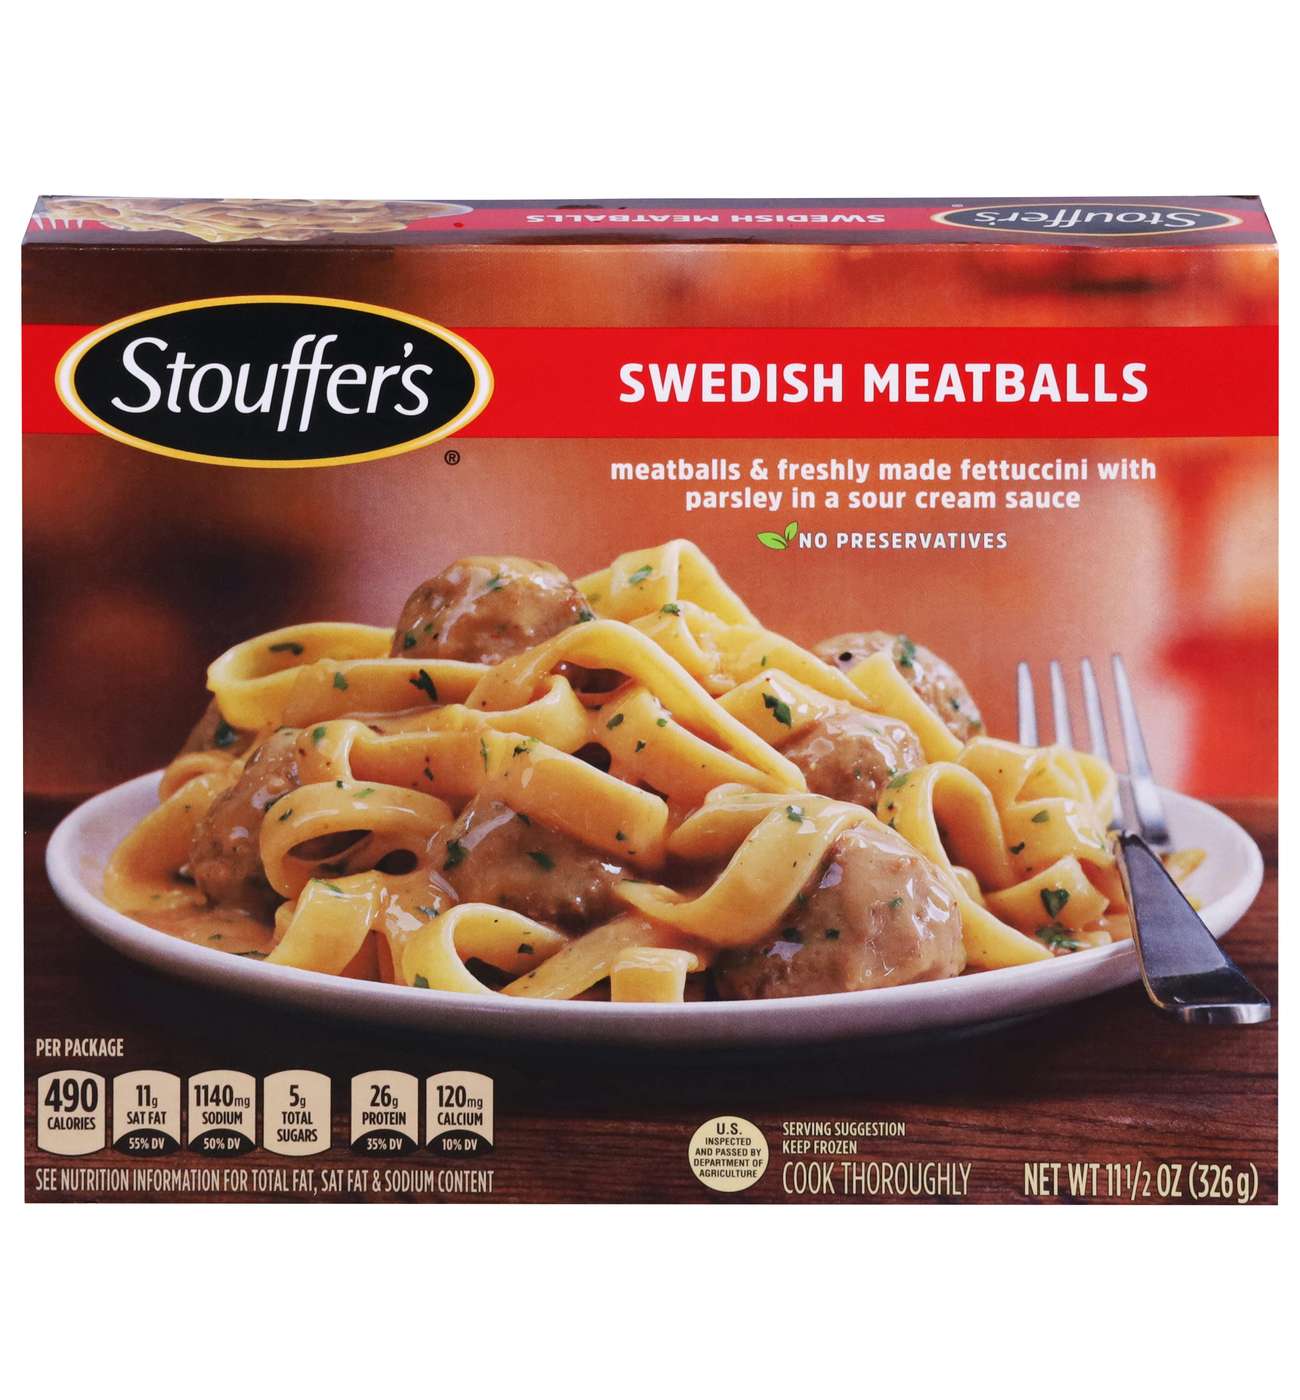 Stouffer's 26g Protein Swedish Meatballs Frozen Meal; image 1 of 7